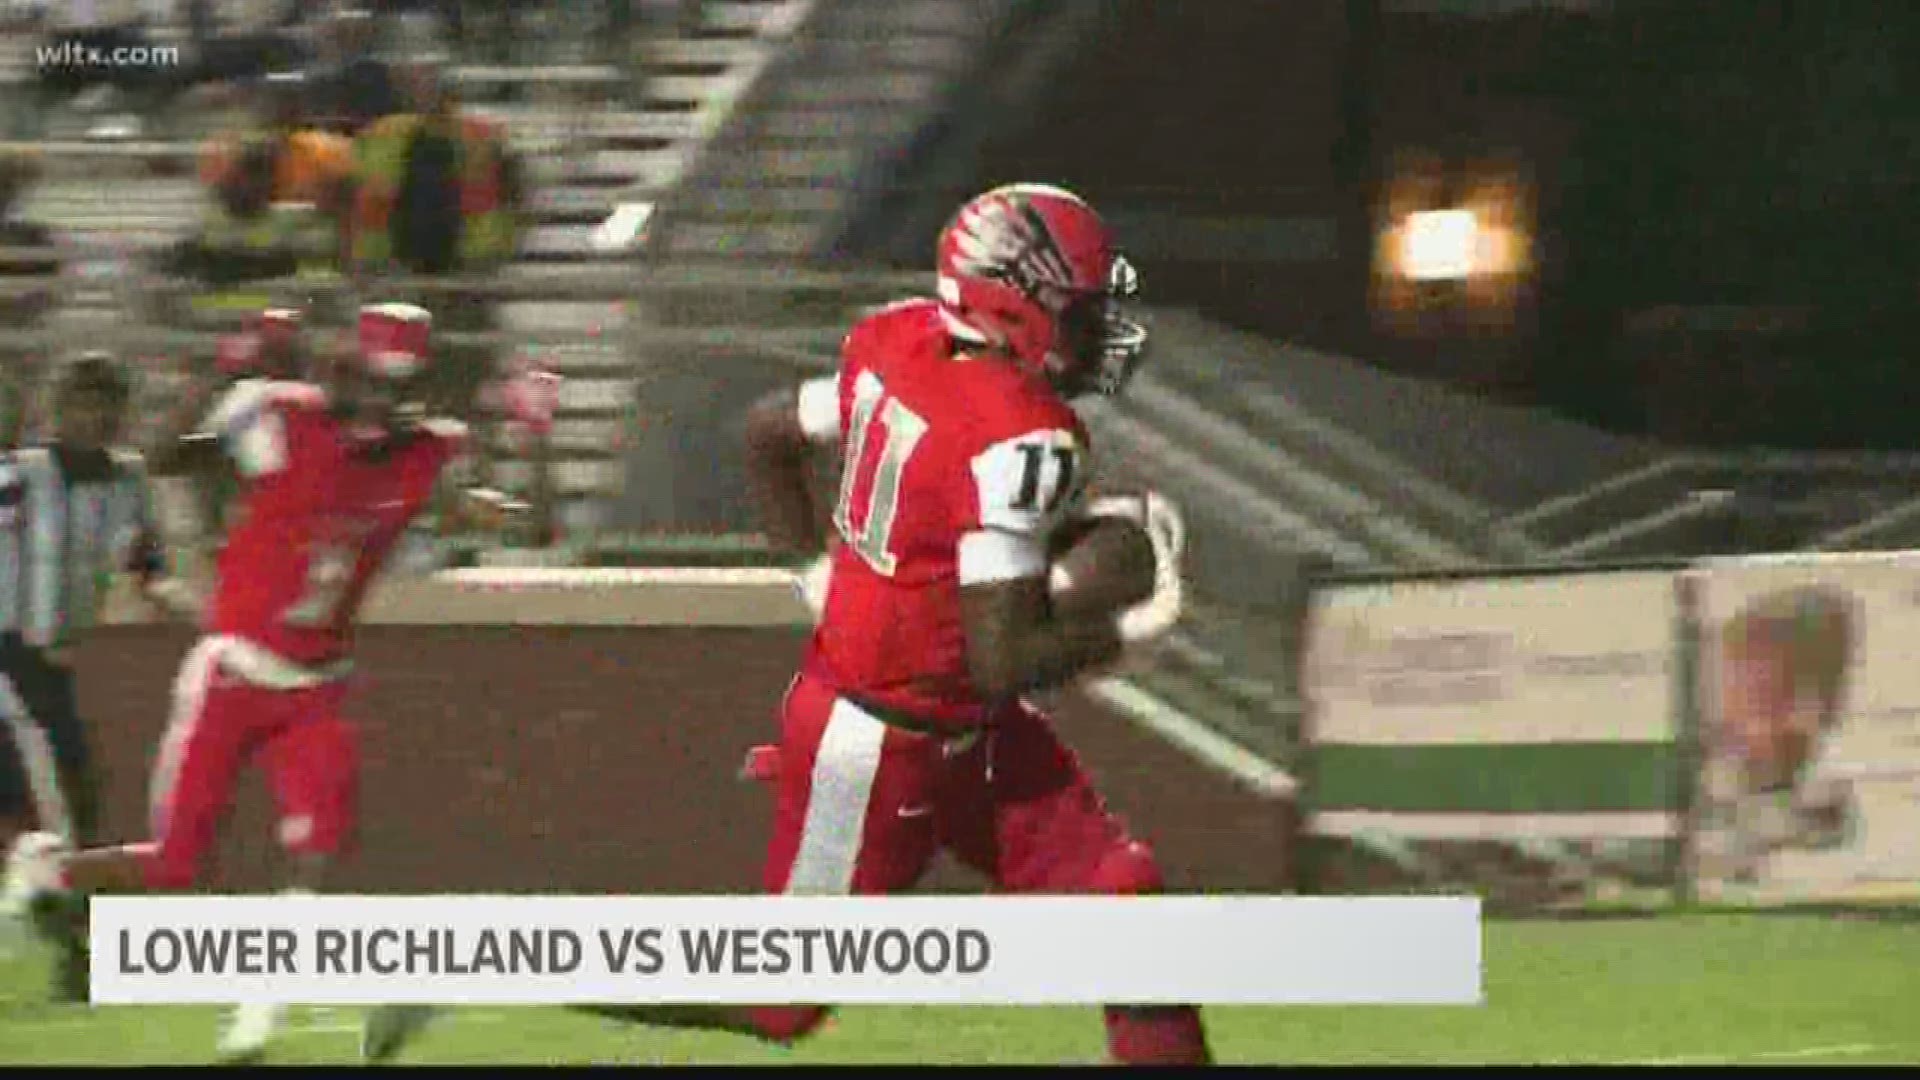 Highlights and scores from Midlands area high school football games. (Part 2 of 2)